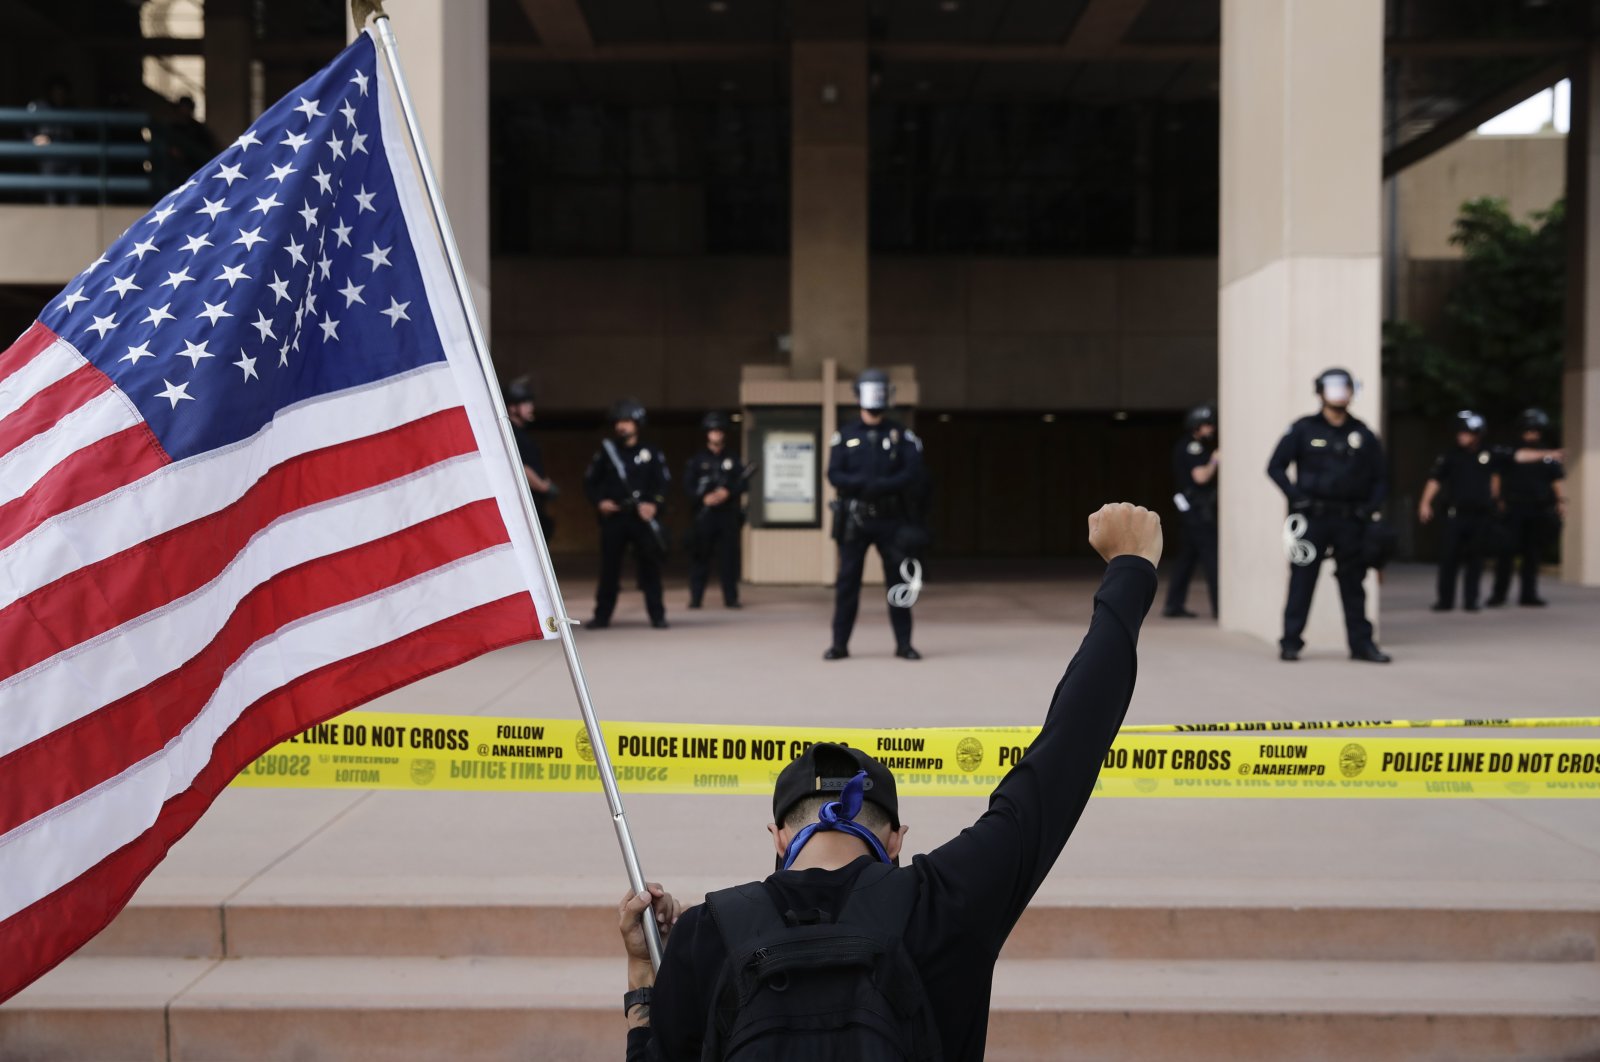 A demonstrator holds up his fist while kneeling before police officers during a protest over the death of George Floyd, Anaheim, Calif., June 1, 2020. (AP Photo)